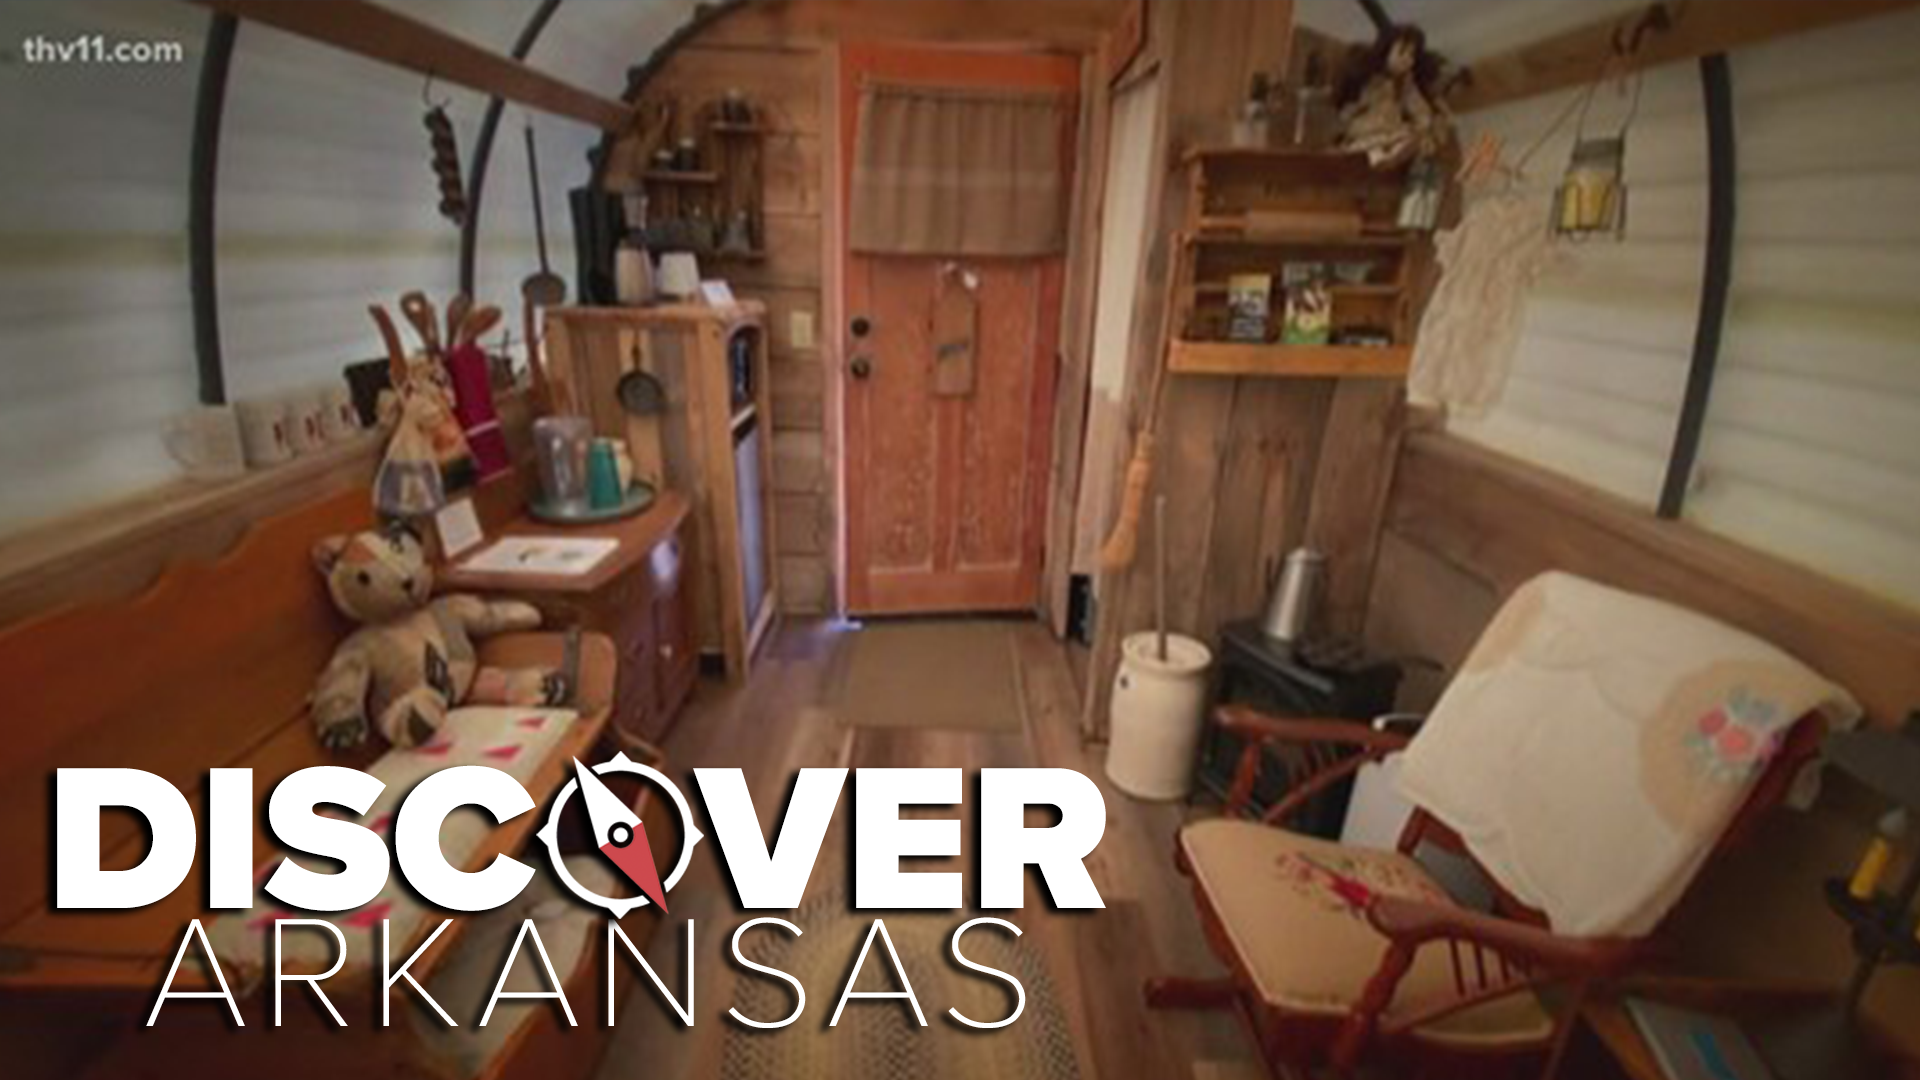 If you're looking for a place to get away from it all, with or without the kids, Ashley King has found a very unique spot in Garland County.